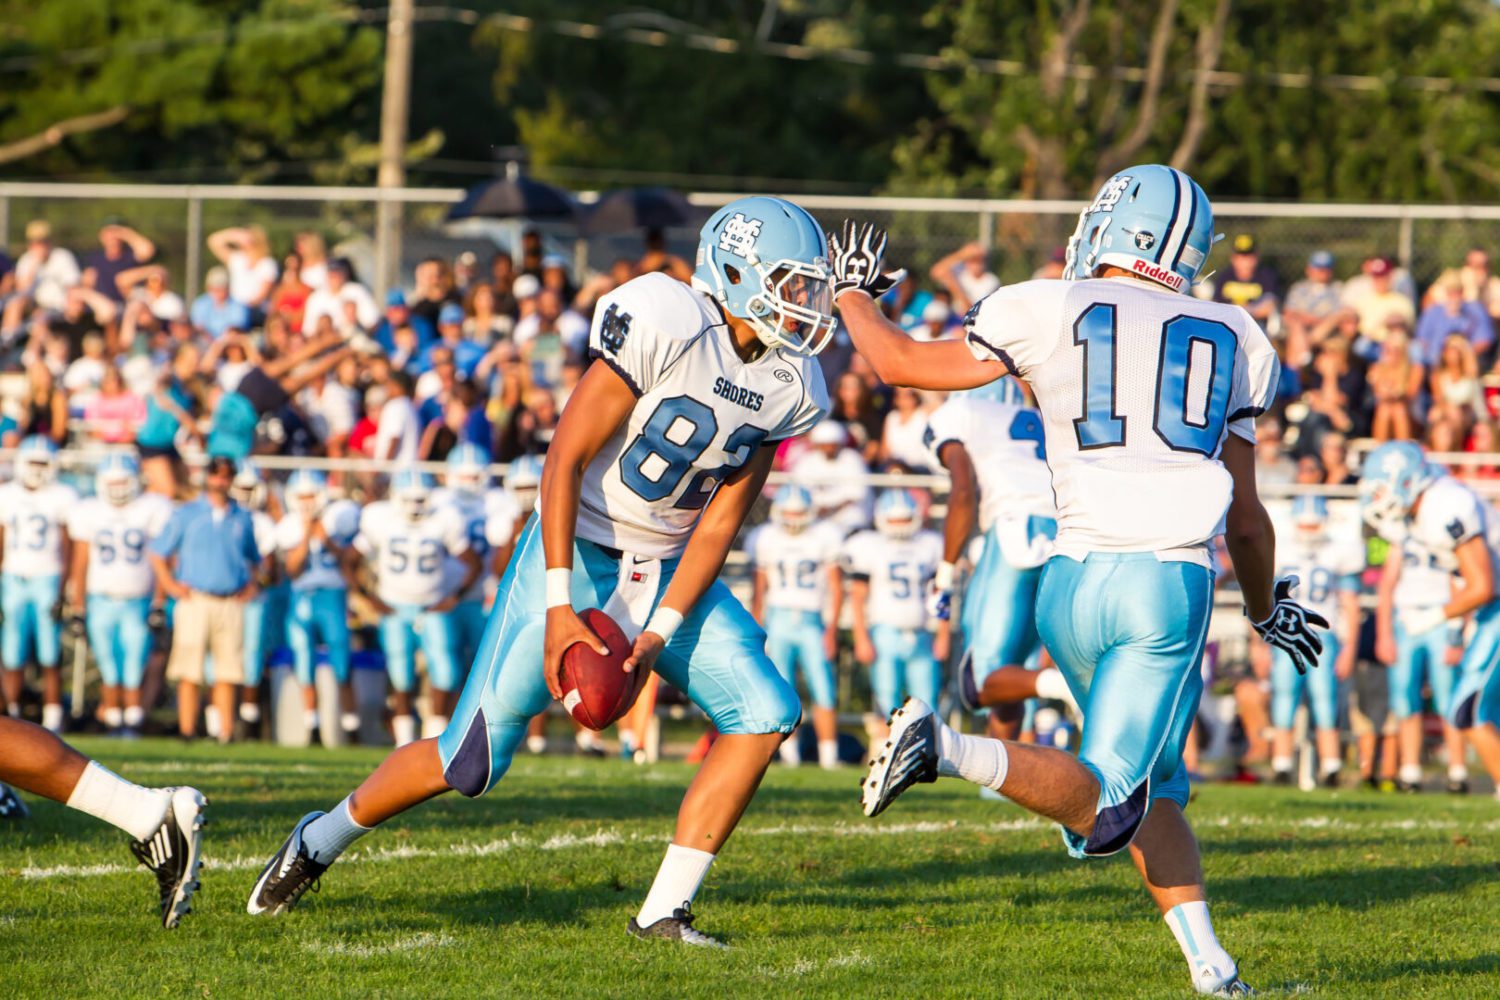 Mona Shores puts it together in 2nd half to down rival Muskegon Catholic 25-16 [with Video]